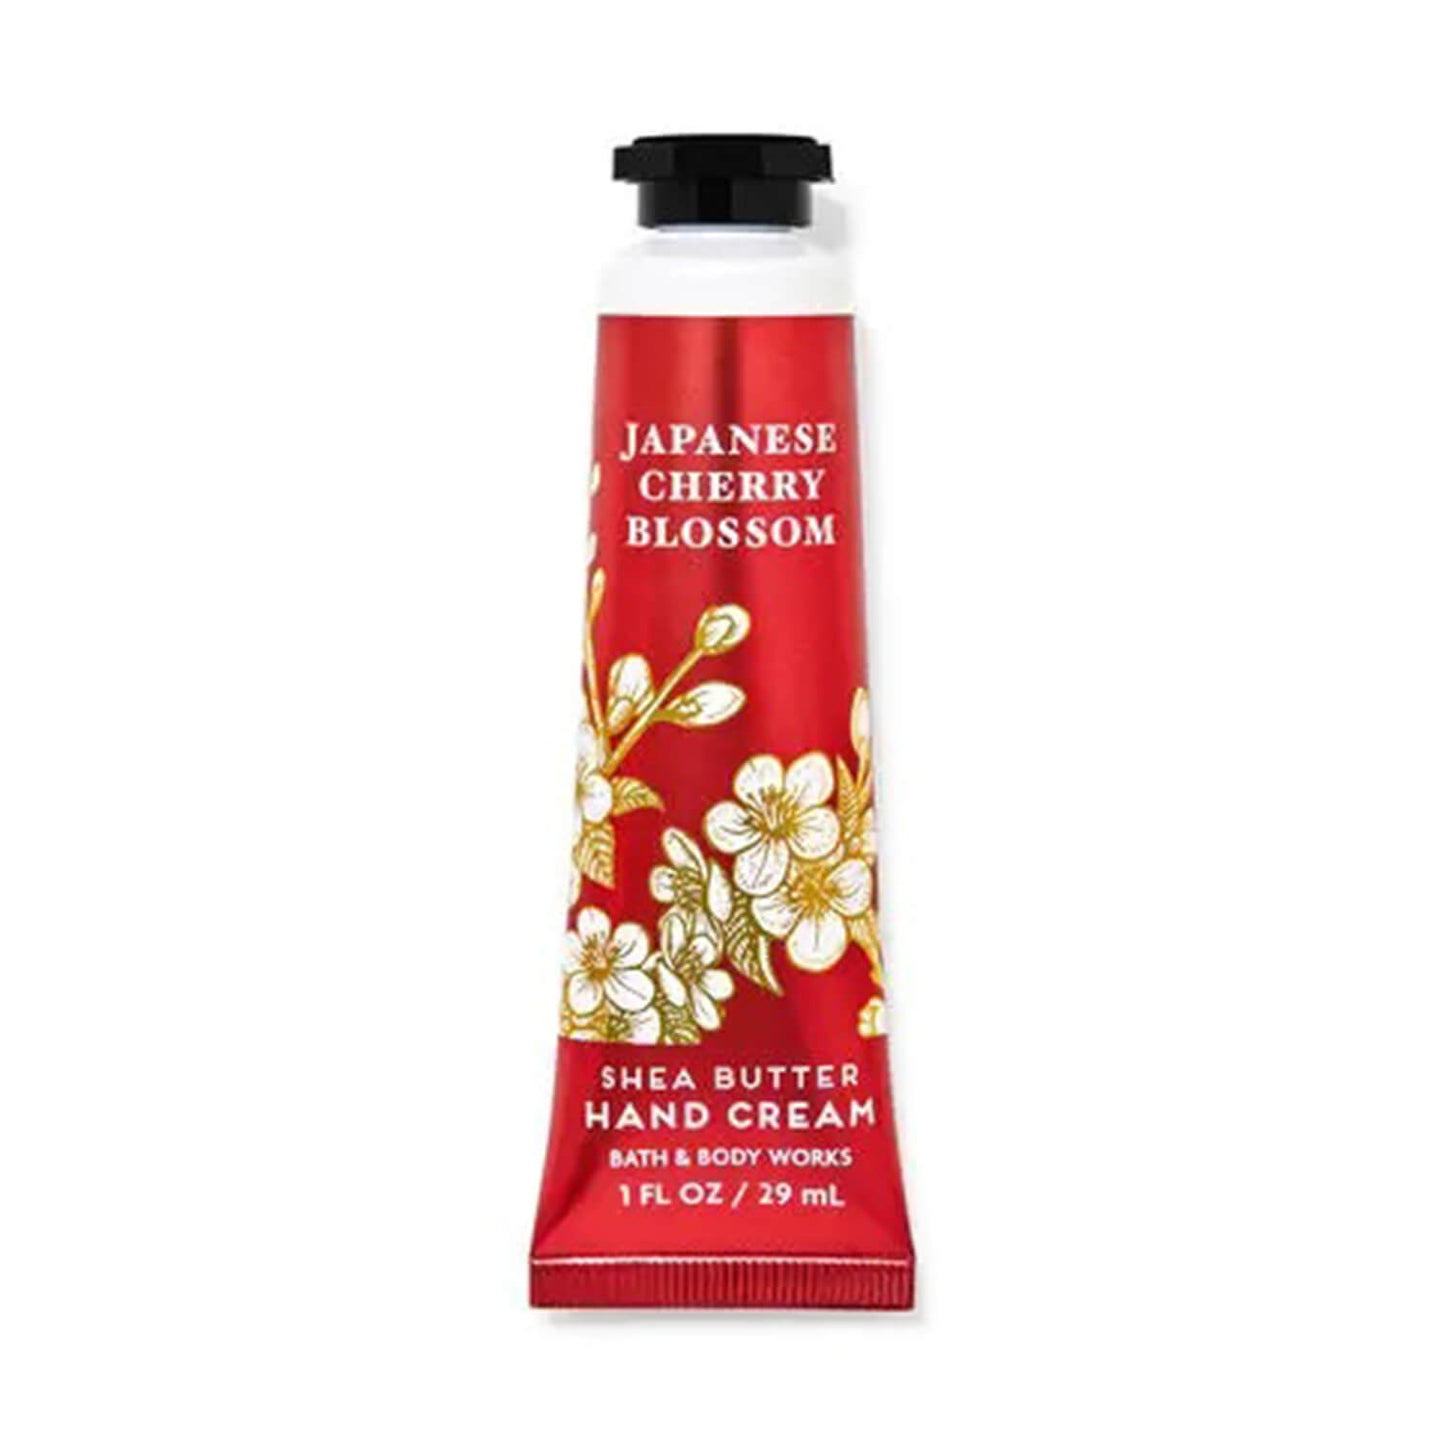 shop bath and body works hand cream in japanese cherry blossom fragrance available at Heygirl.pk for delivery in Pakistan